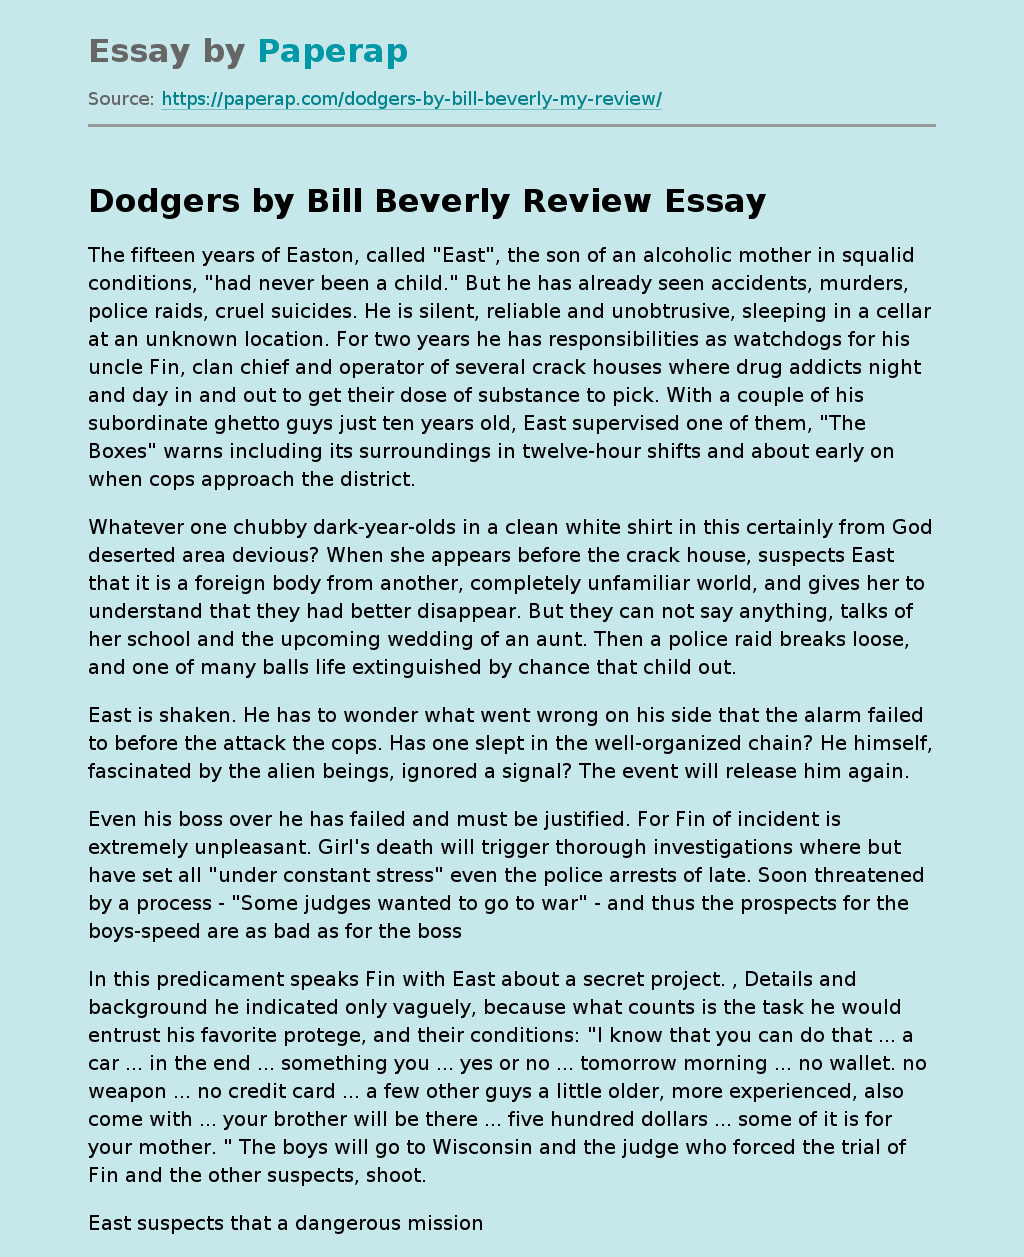 Dodgers by Bill Beverly Review